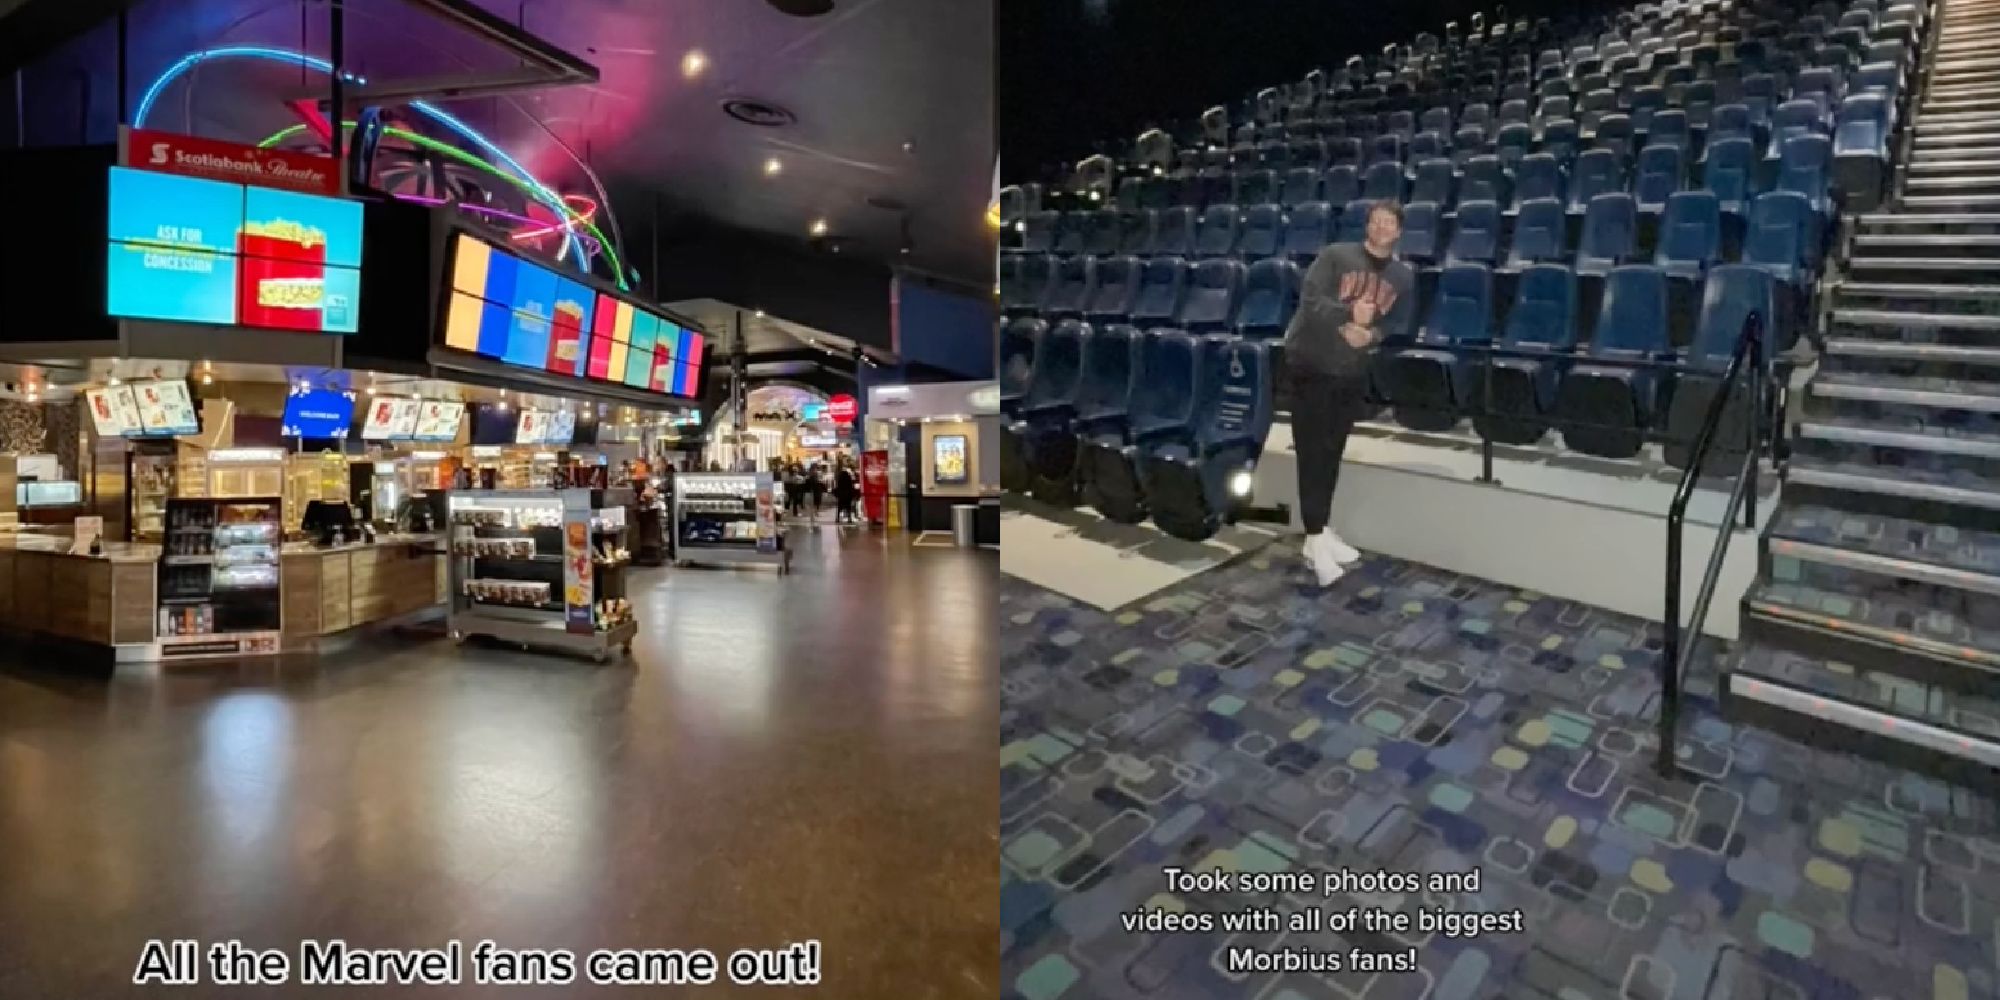 A TikToker takes a video of an empty Morbius theater